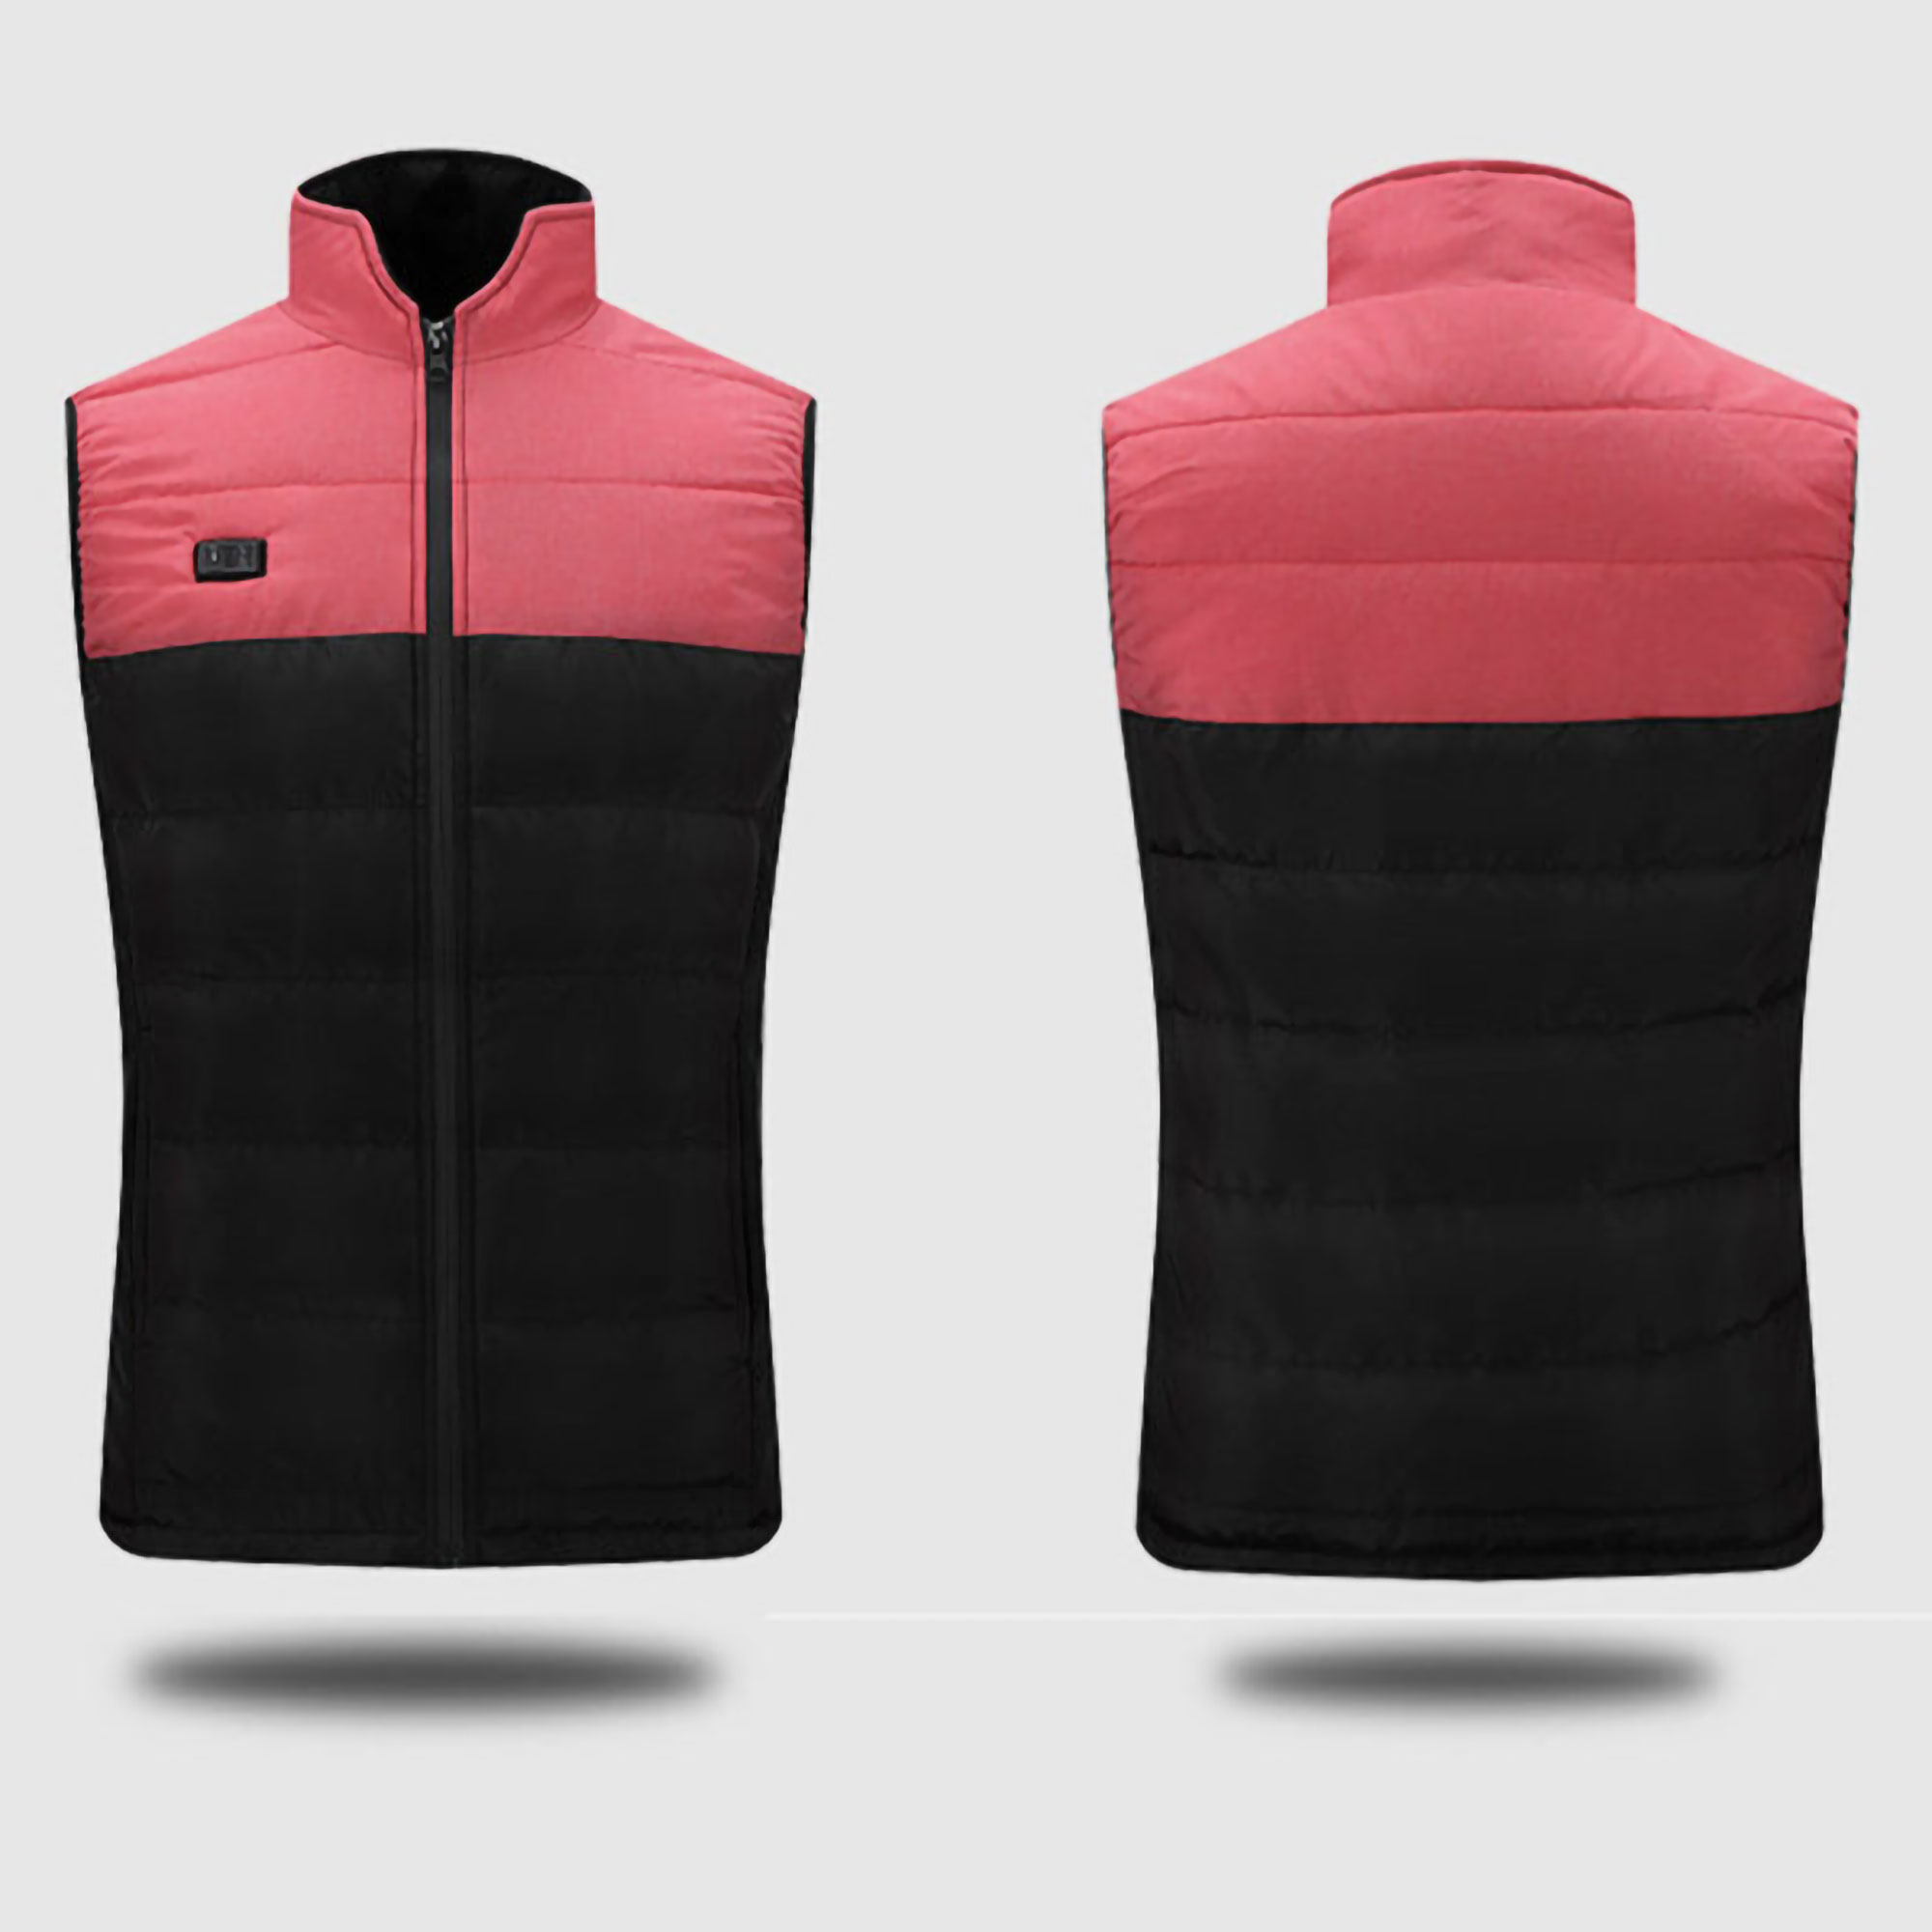 Sexy Dance Electric Thermal Heated Vest for Men Women Sleeveless Zipper Heating Jacket Lightweight Warmth Outwear With Battery Pack - image 3 of 3